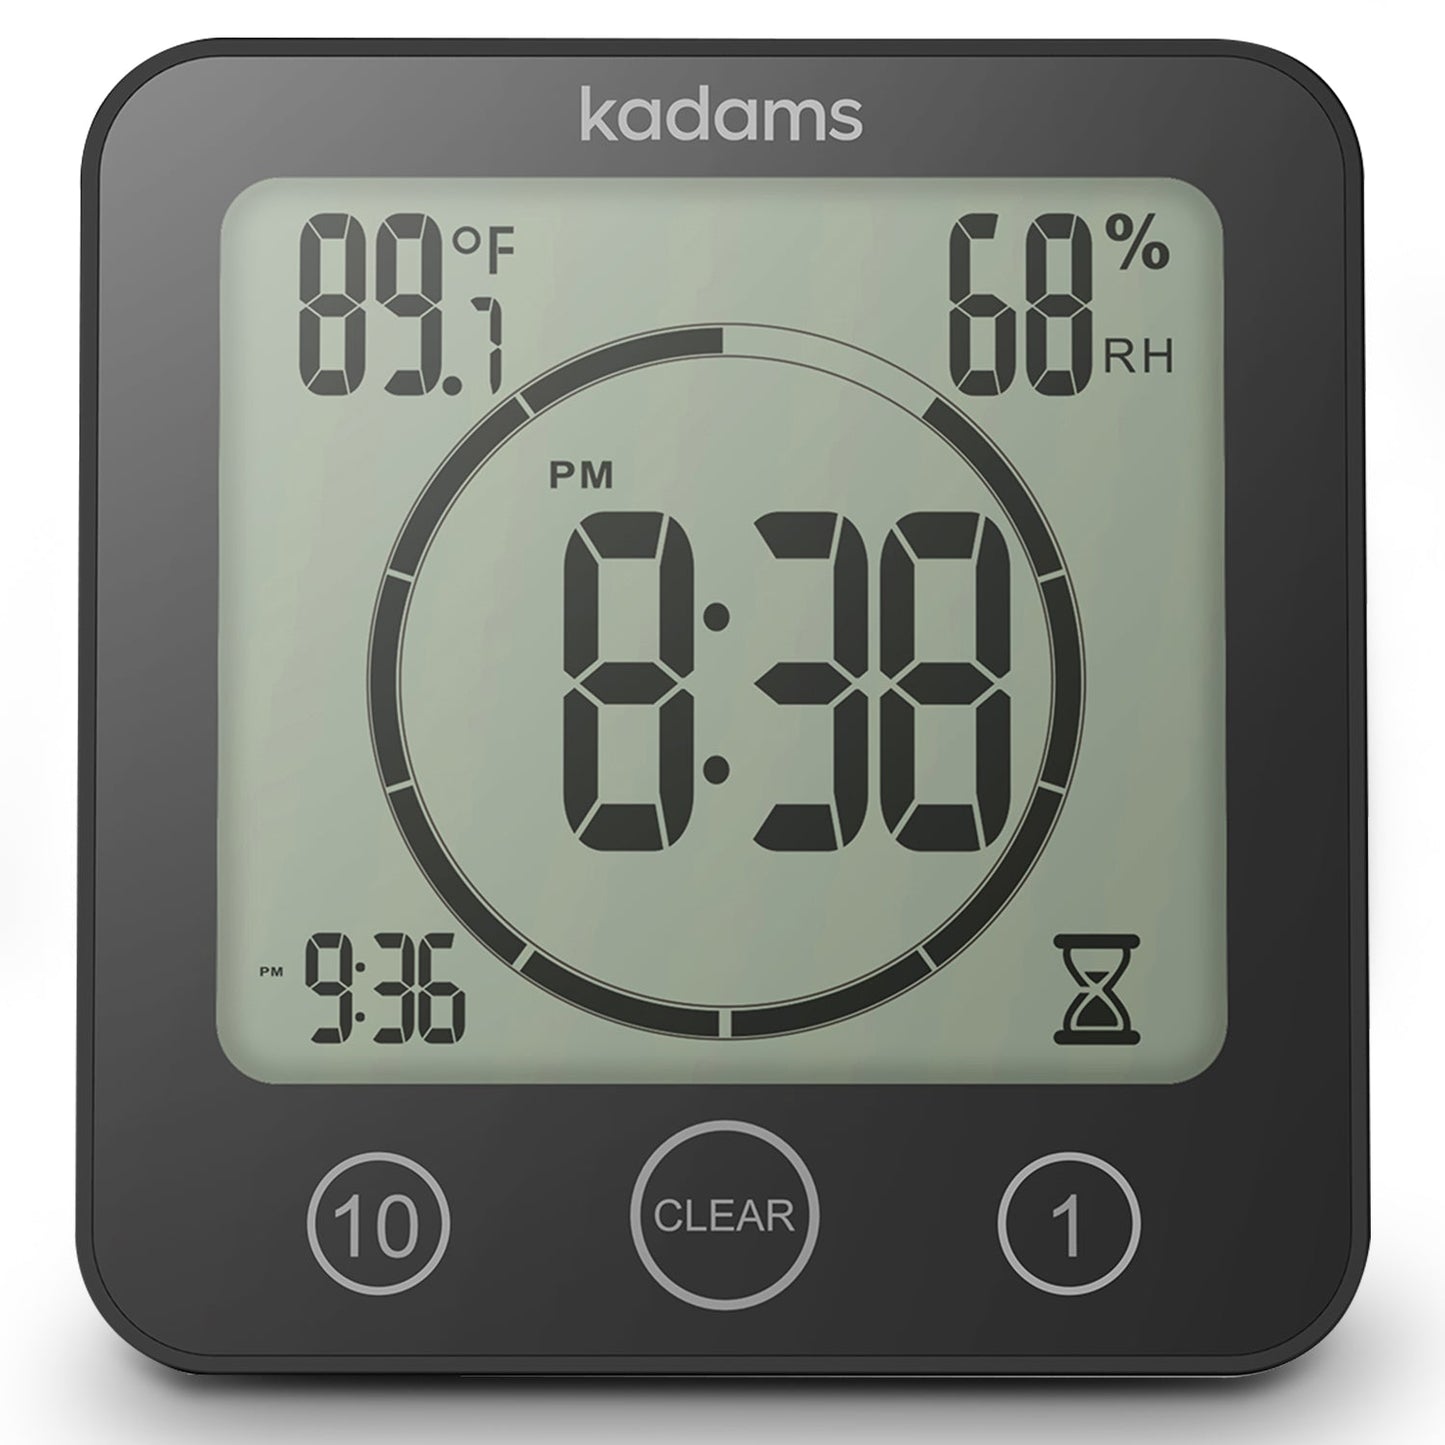 KADAMS Digital Bathroom Shower Kitchen Wall Clock Timer with Alarm, Waterproof for Water Spray, Touch Screen Timer, Temperature Humidity, Suction Cup Hanging Hole Stand (Black)